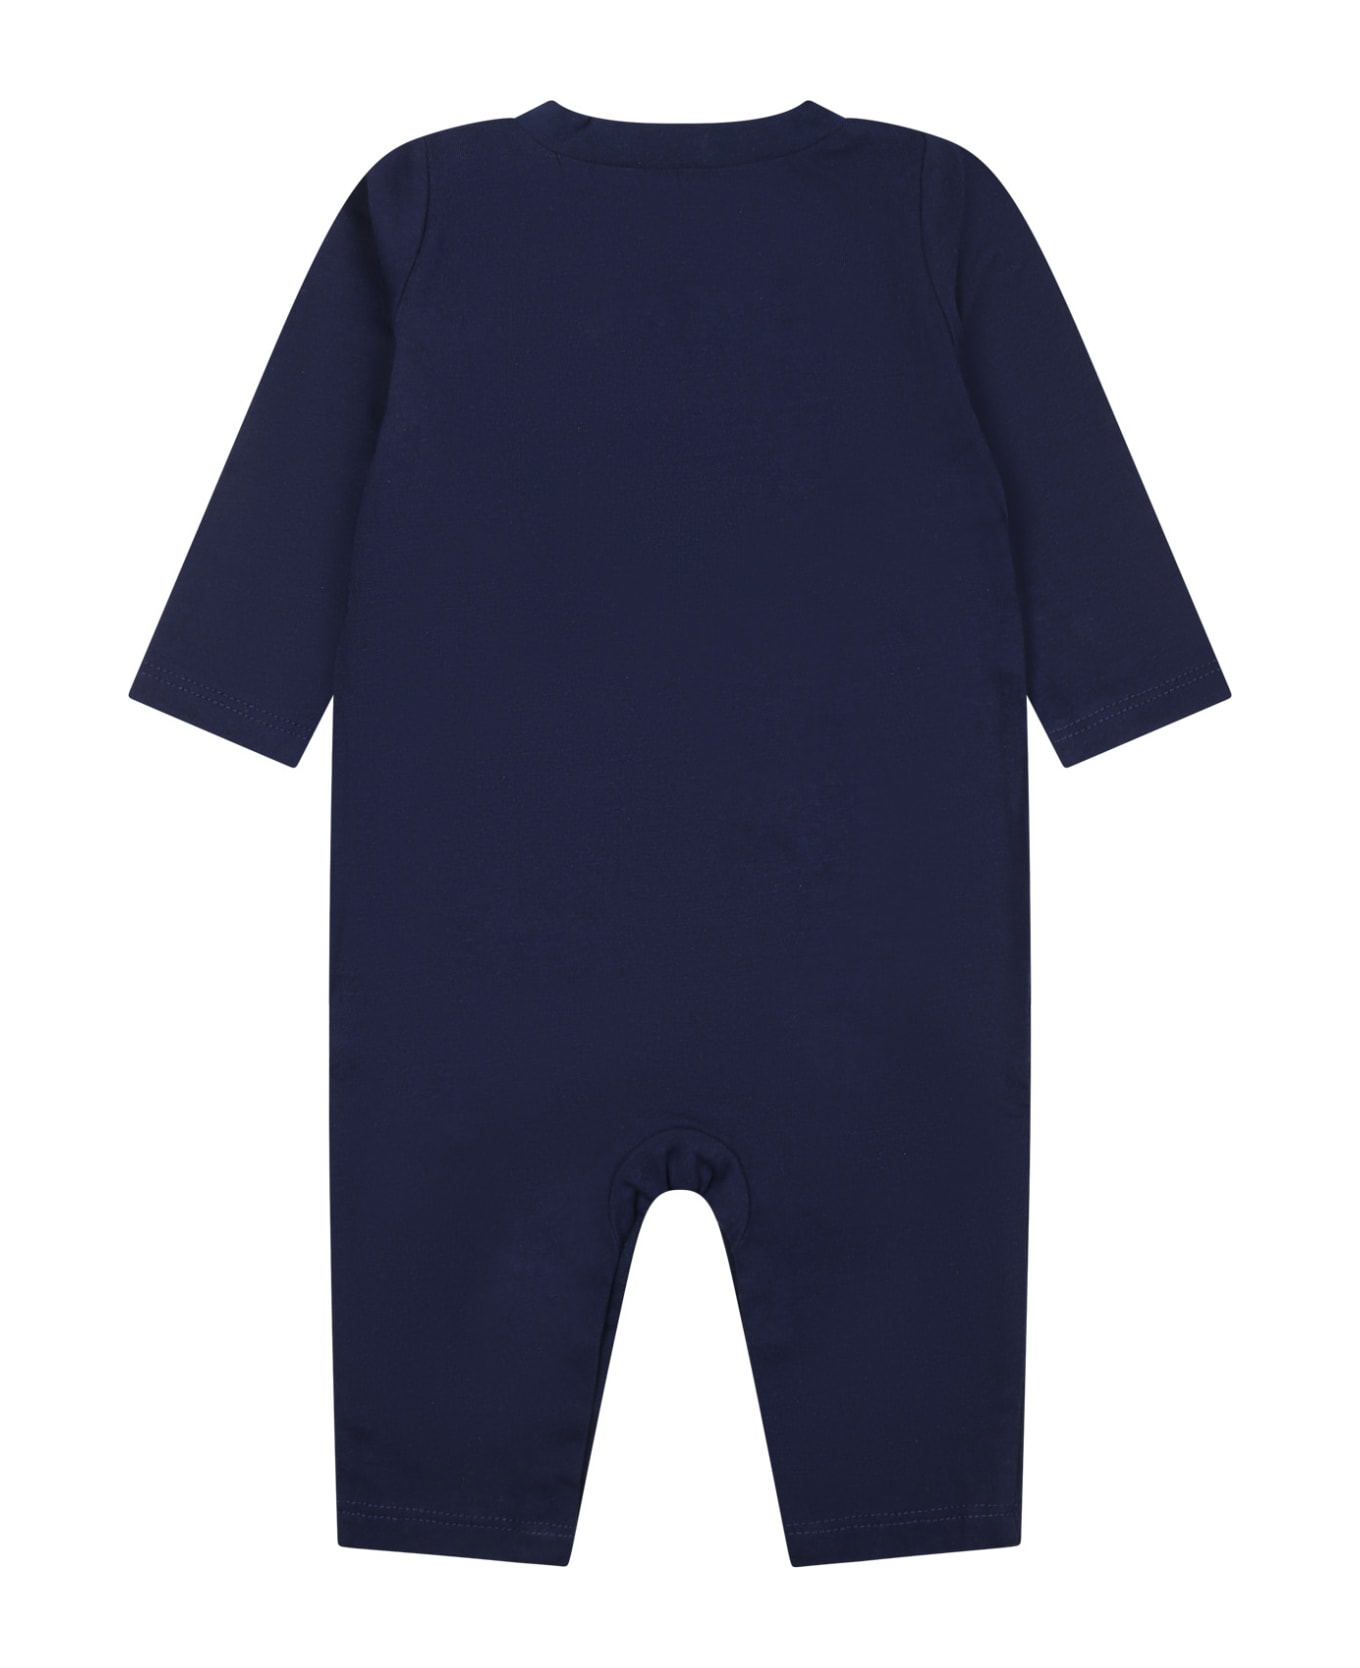 Nike Blue Babygrow For Baby Boy With Swoosh - Blue ボディスーツ＆セットアップ